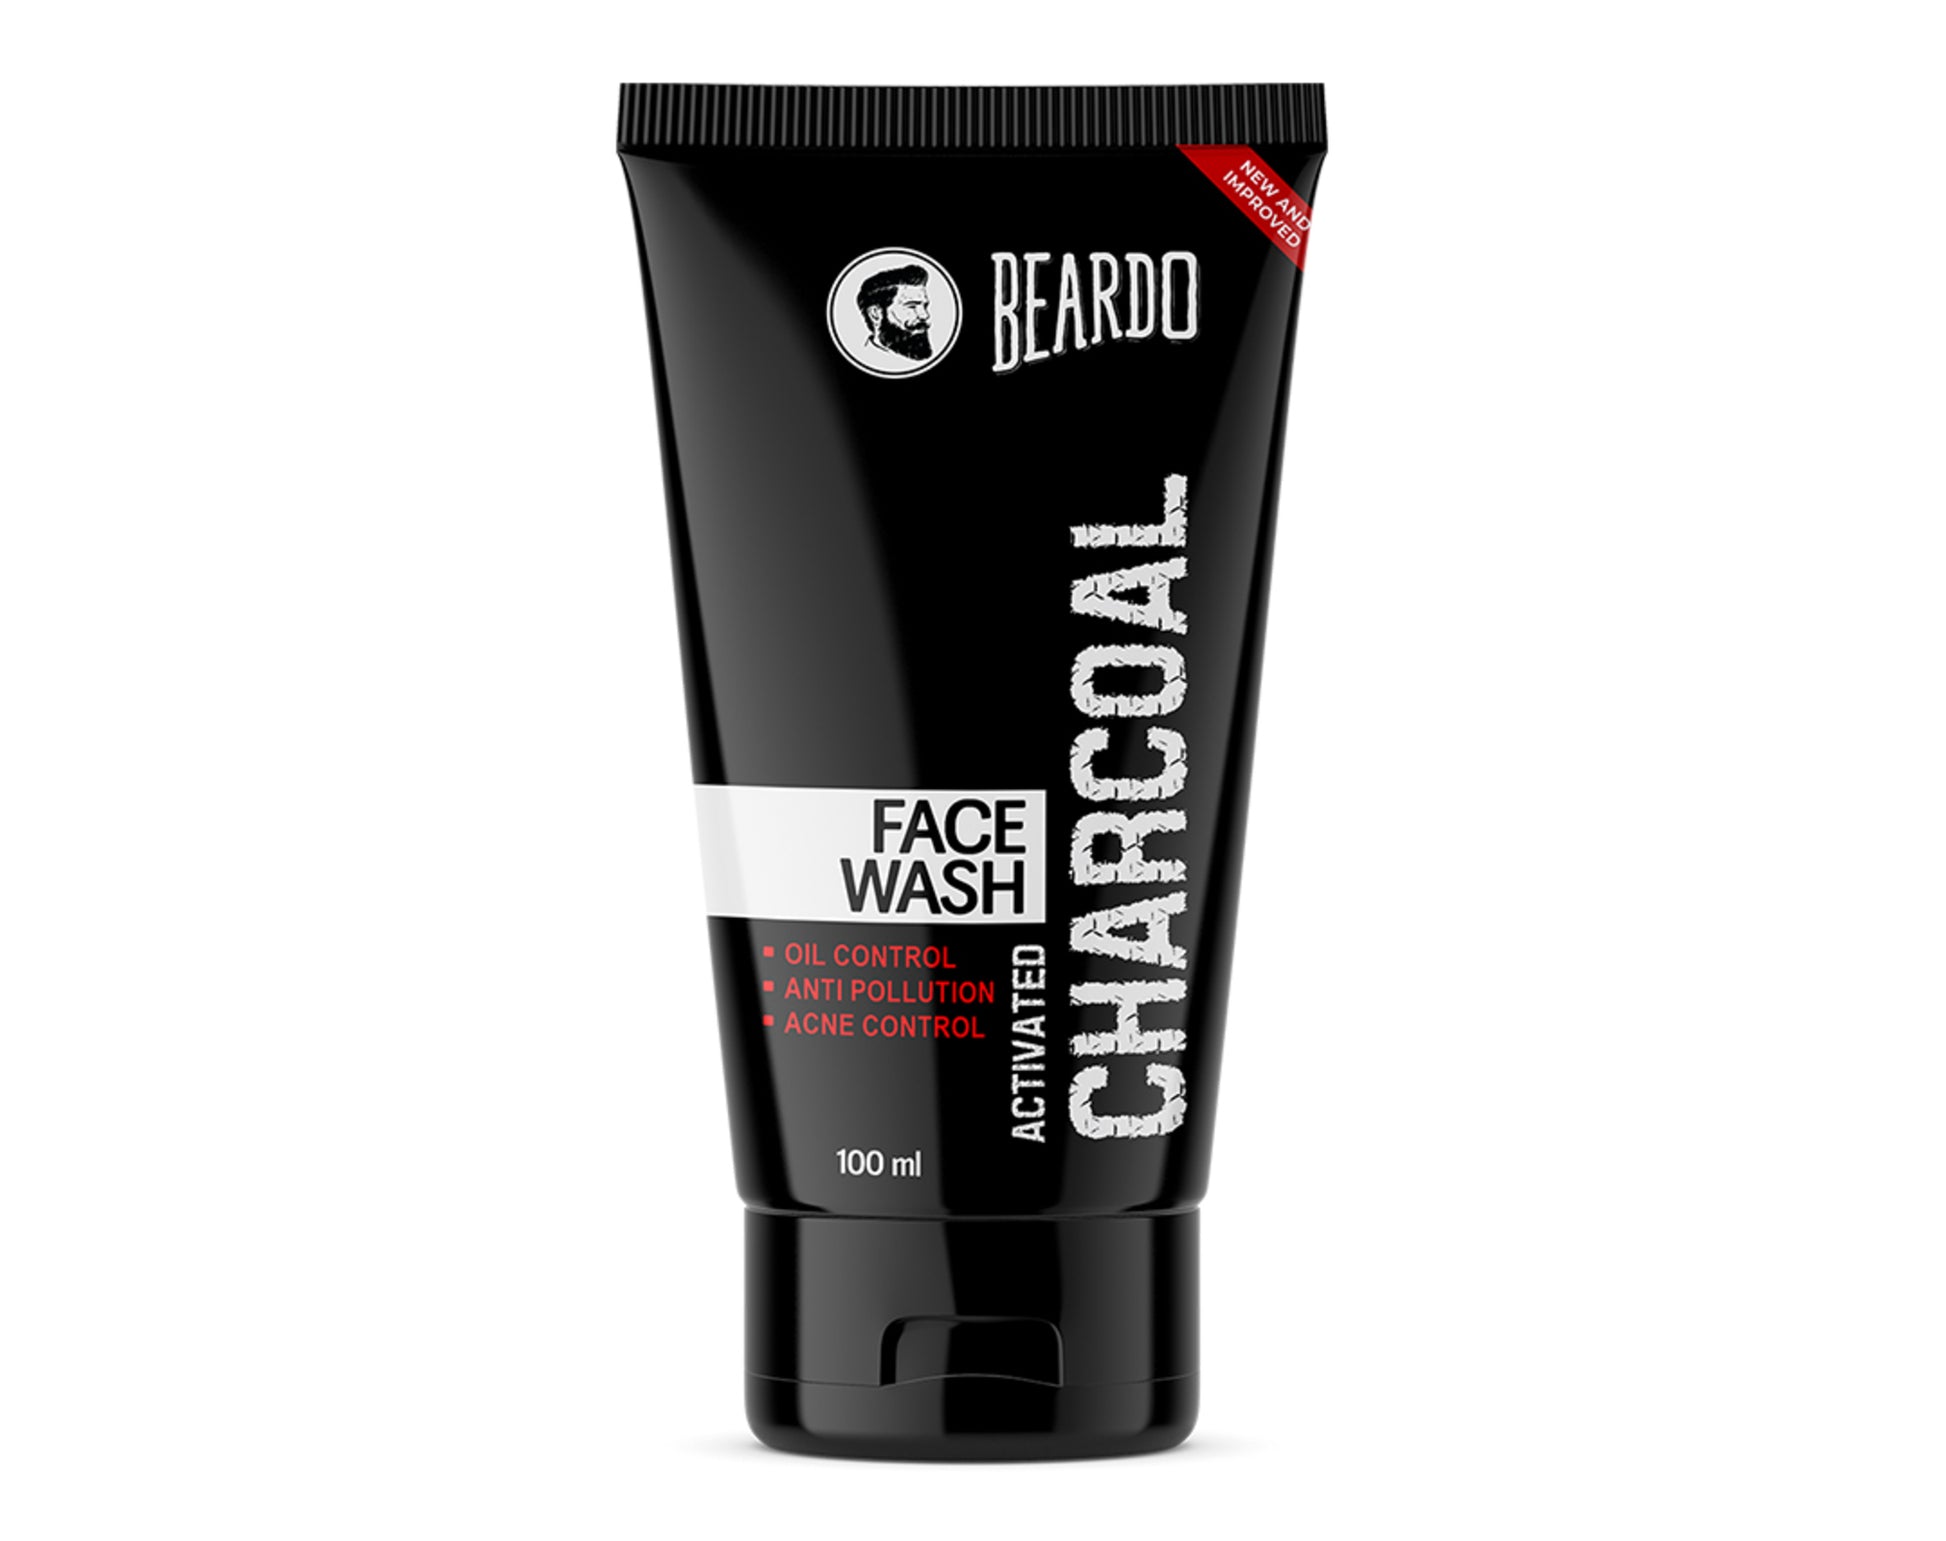 beardo face wash, activated charcoal face wash, oil control, anti pollution, acne control